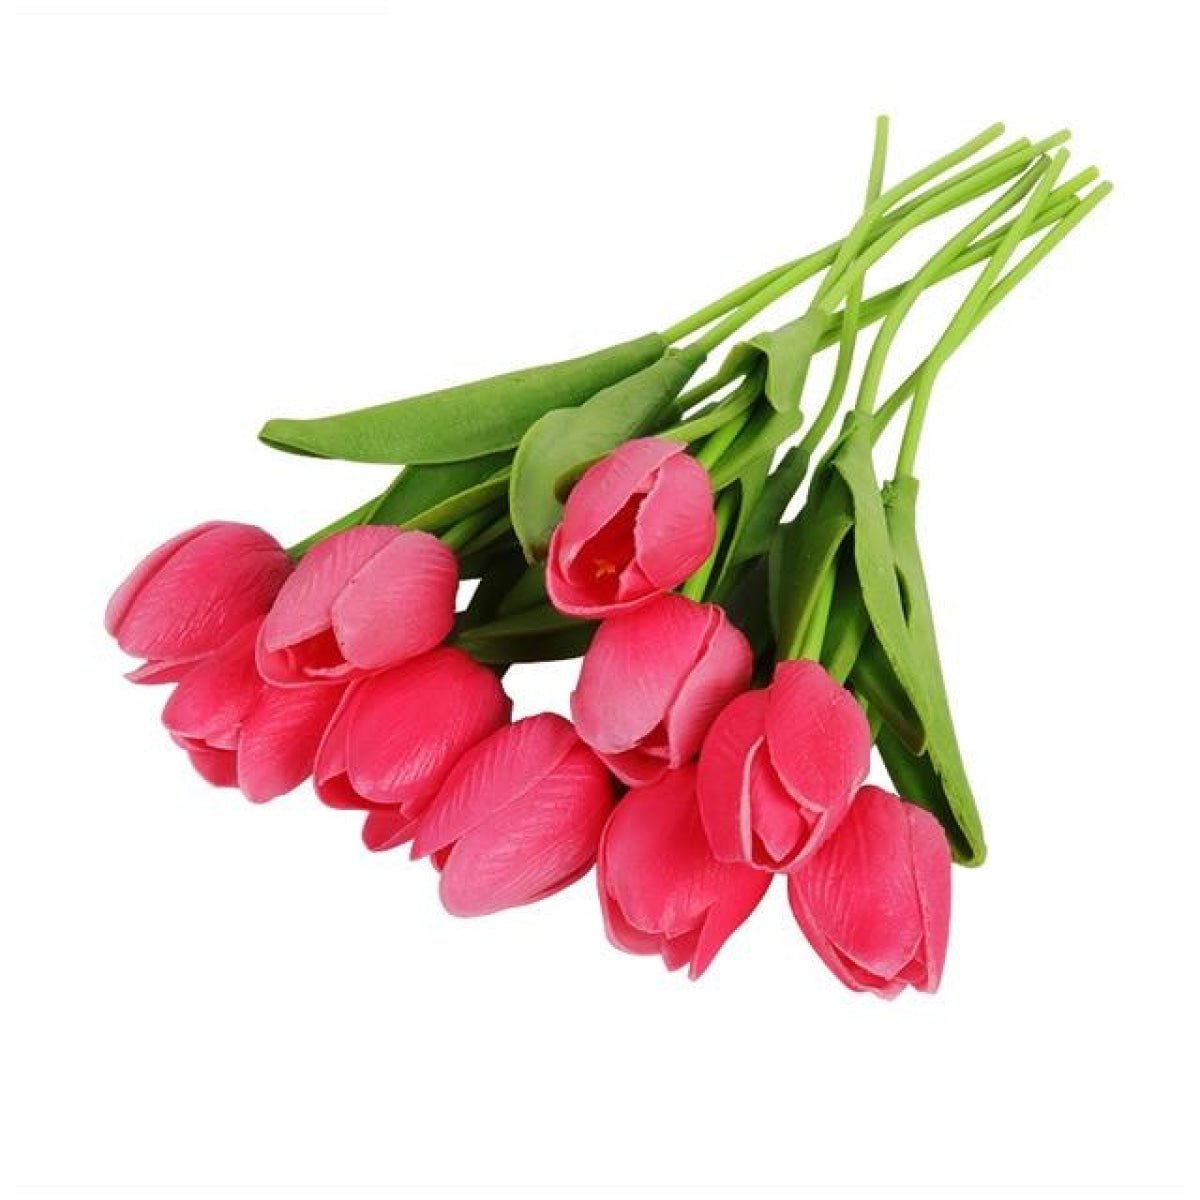 10x Artificial Tulips Flowers 35cm Stem Bouquet Fake Flower Wedding Bridal Decoration - Rose Pink - - Asia Sell